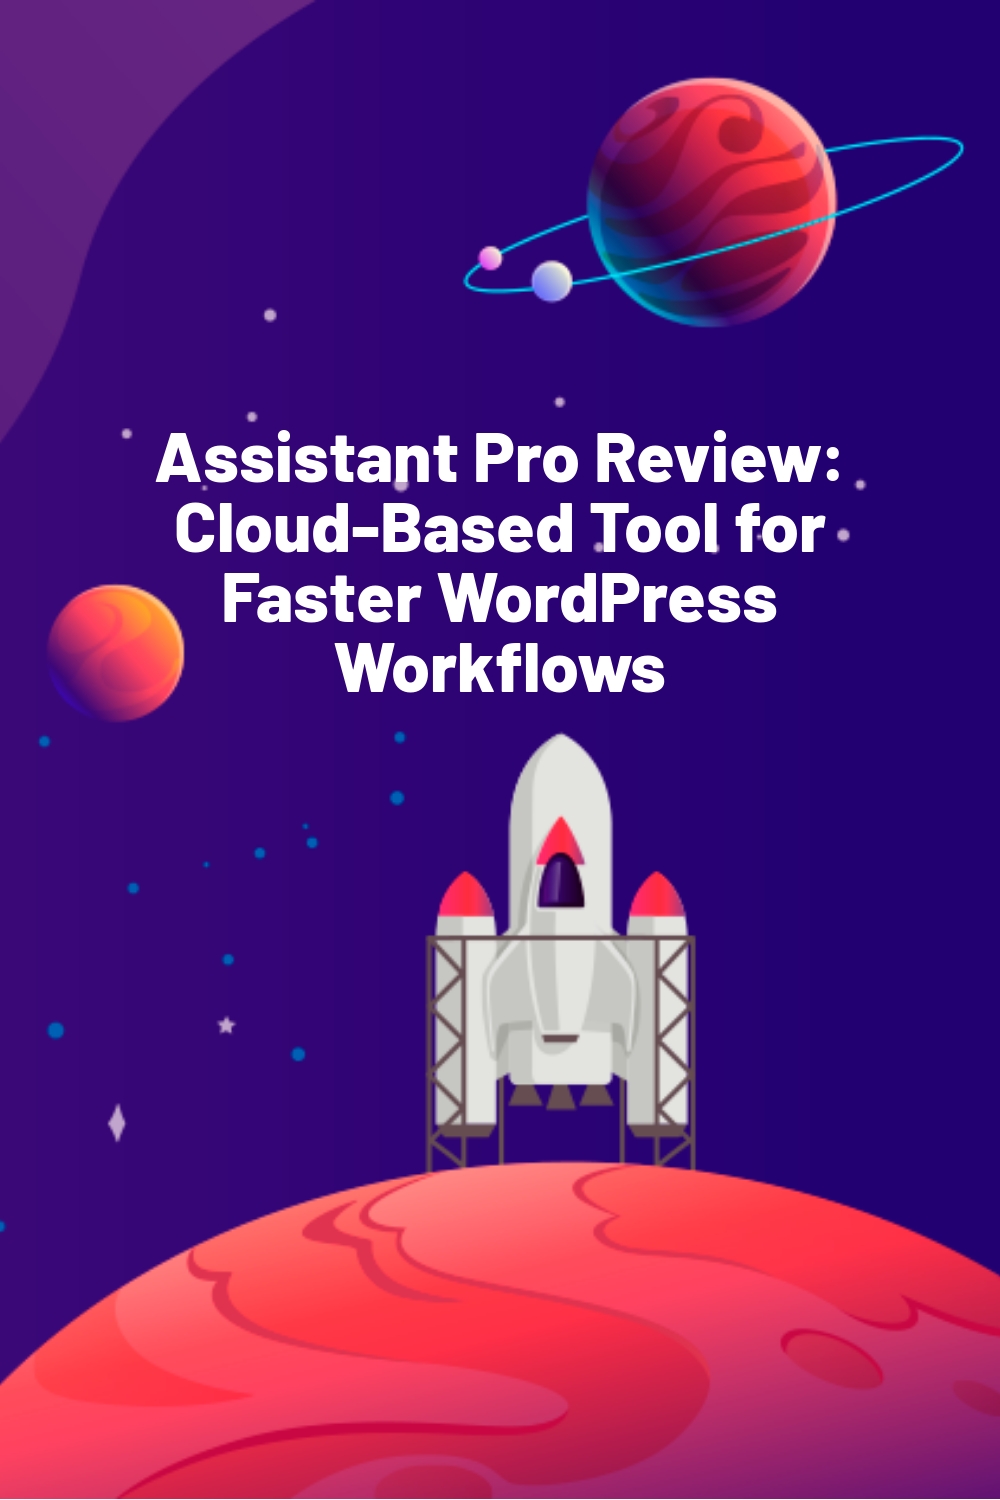 Assistant Pro Review: Cloud-Based Tool for Faster WordPress Workflows